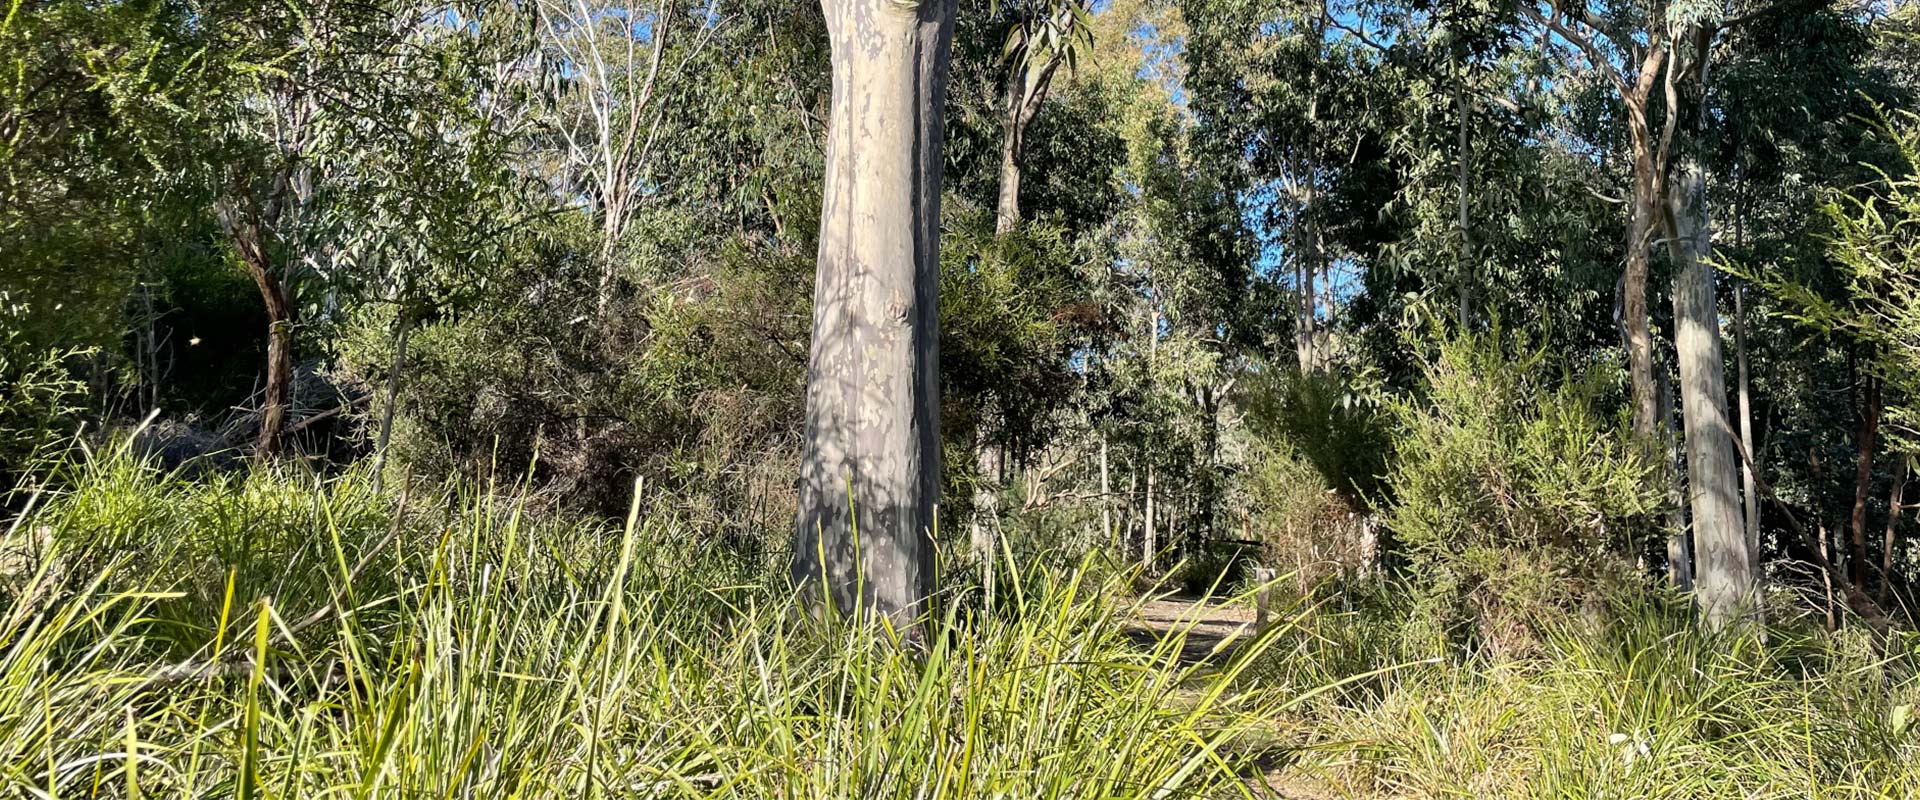 A dense bushy area with native grass and tall eucalypts.